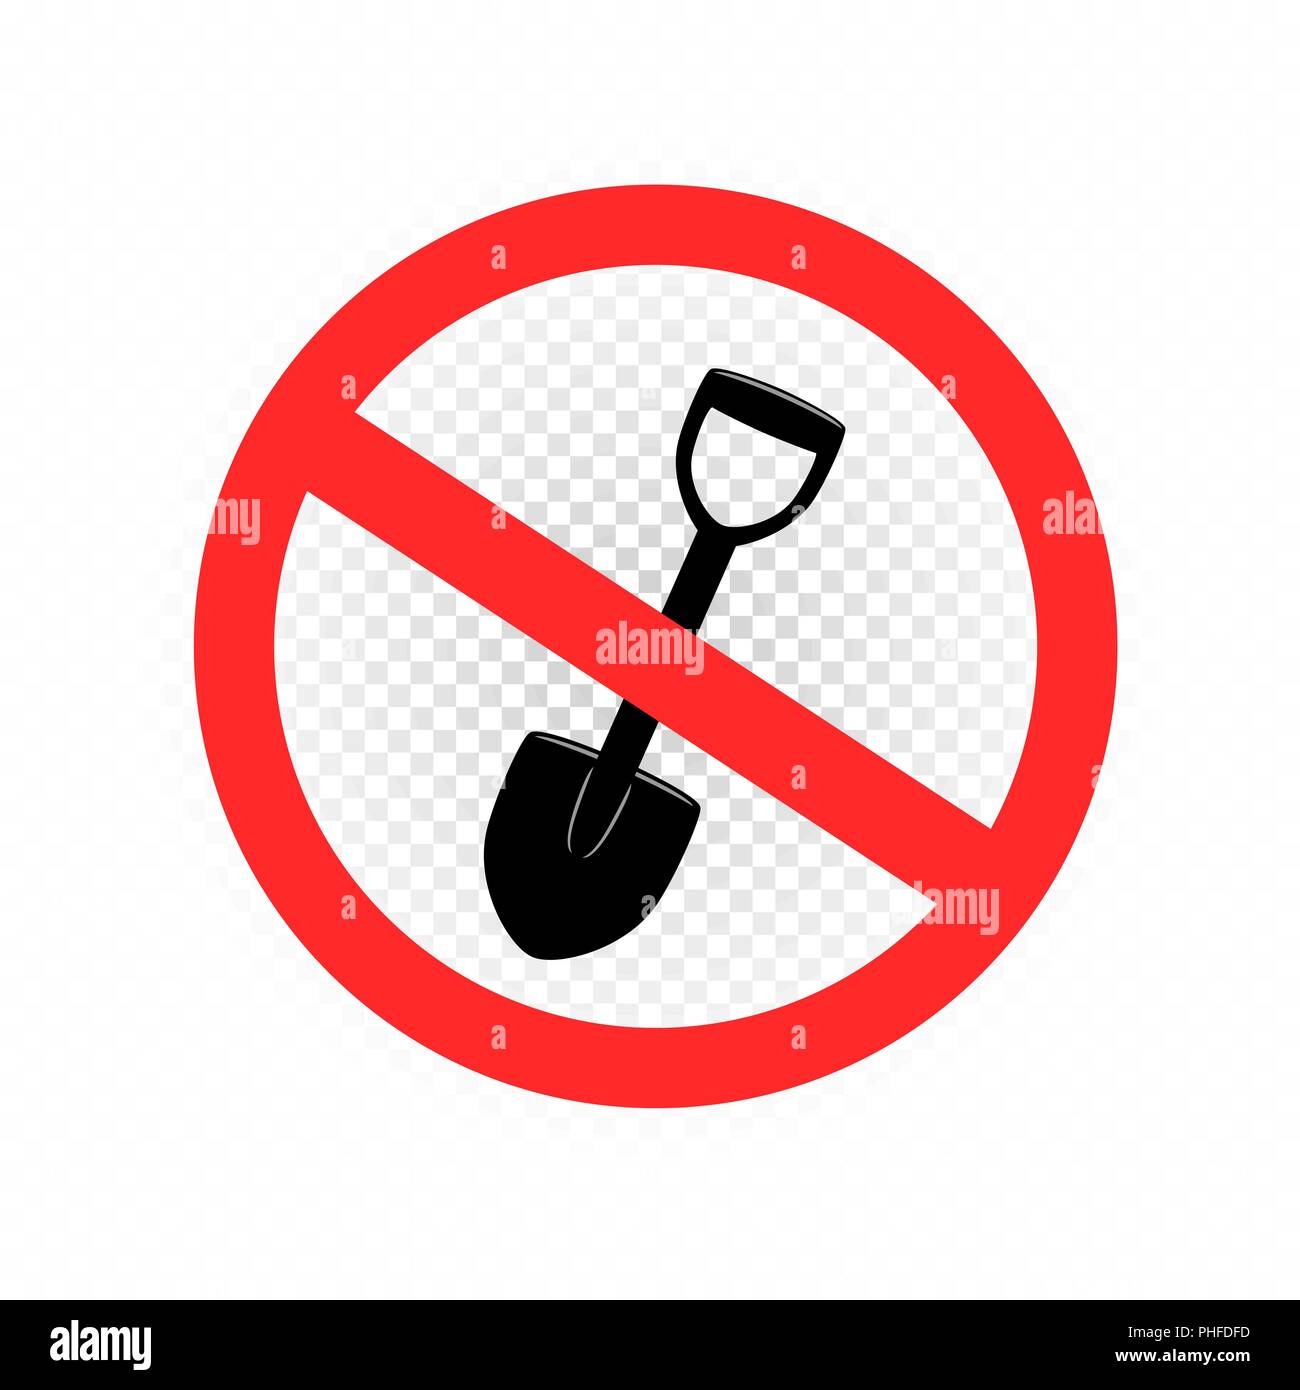 digging is forbidden sign icon Stock Vector